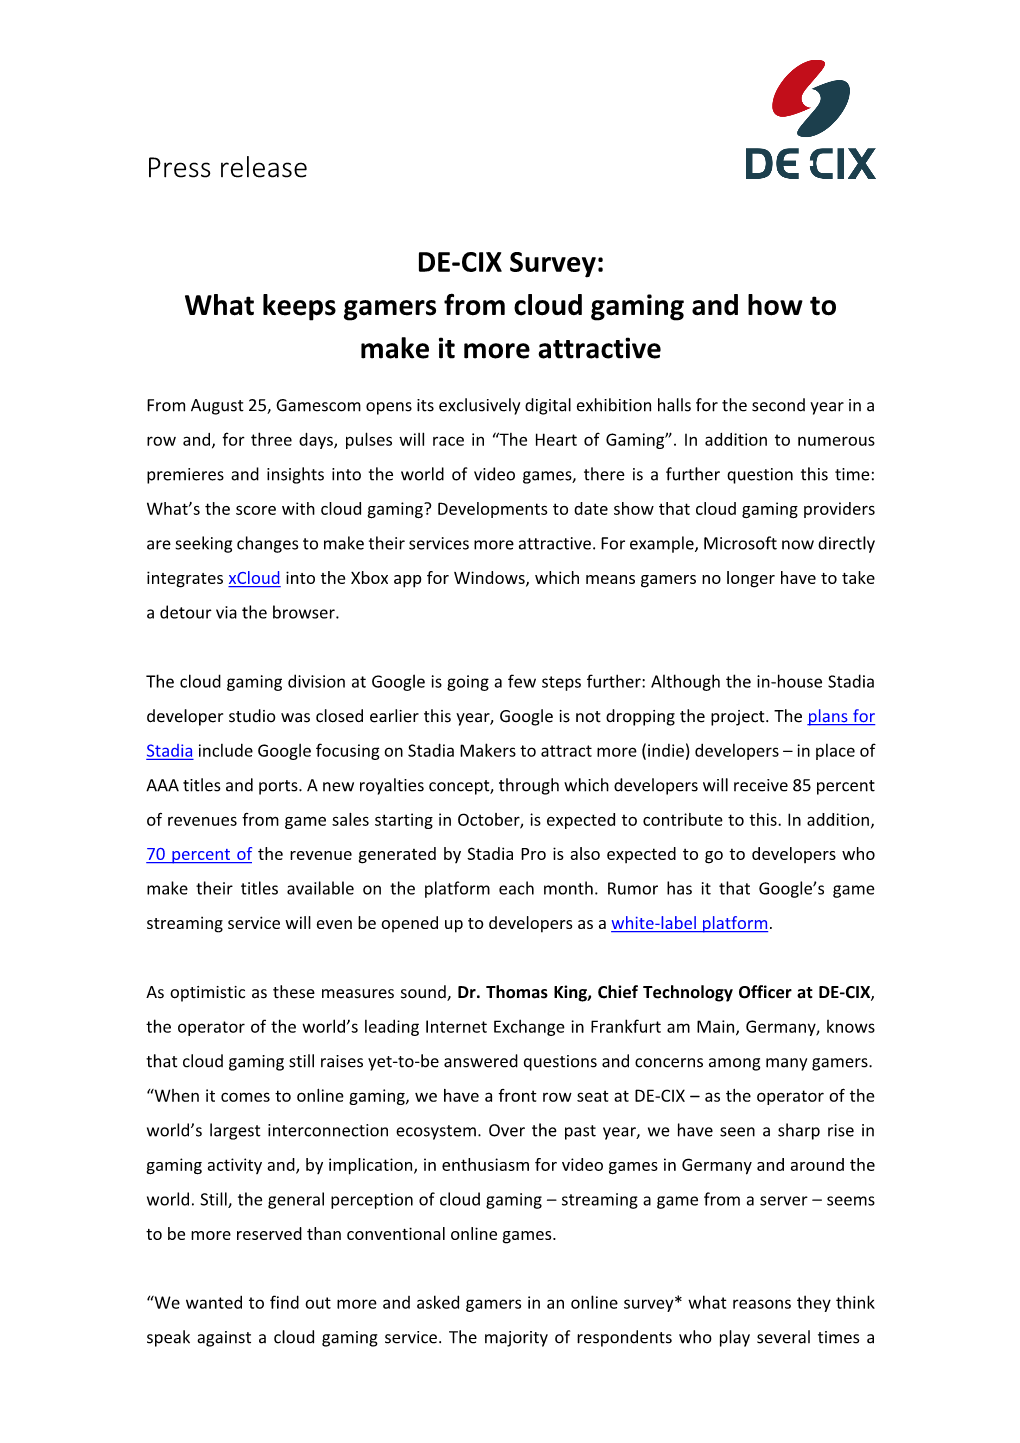 Press Release DE-CIX Survey: What Keeps Gamers from Cloud Gaming and How to Make It More Attractive